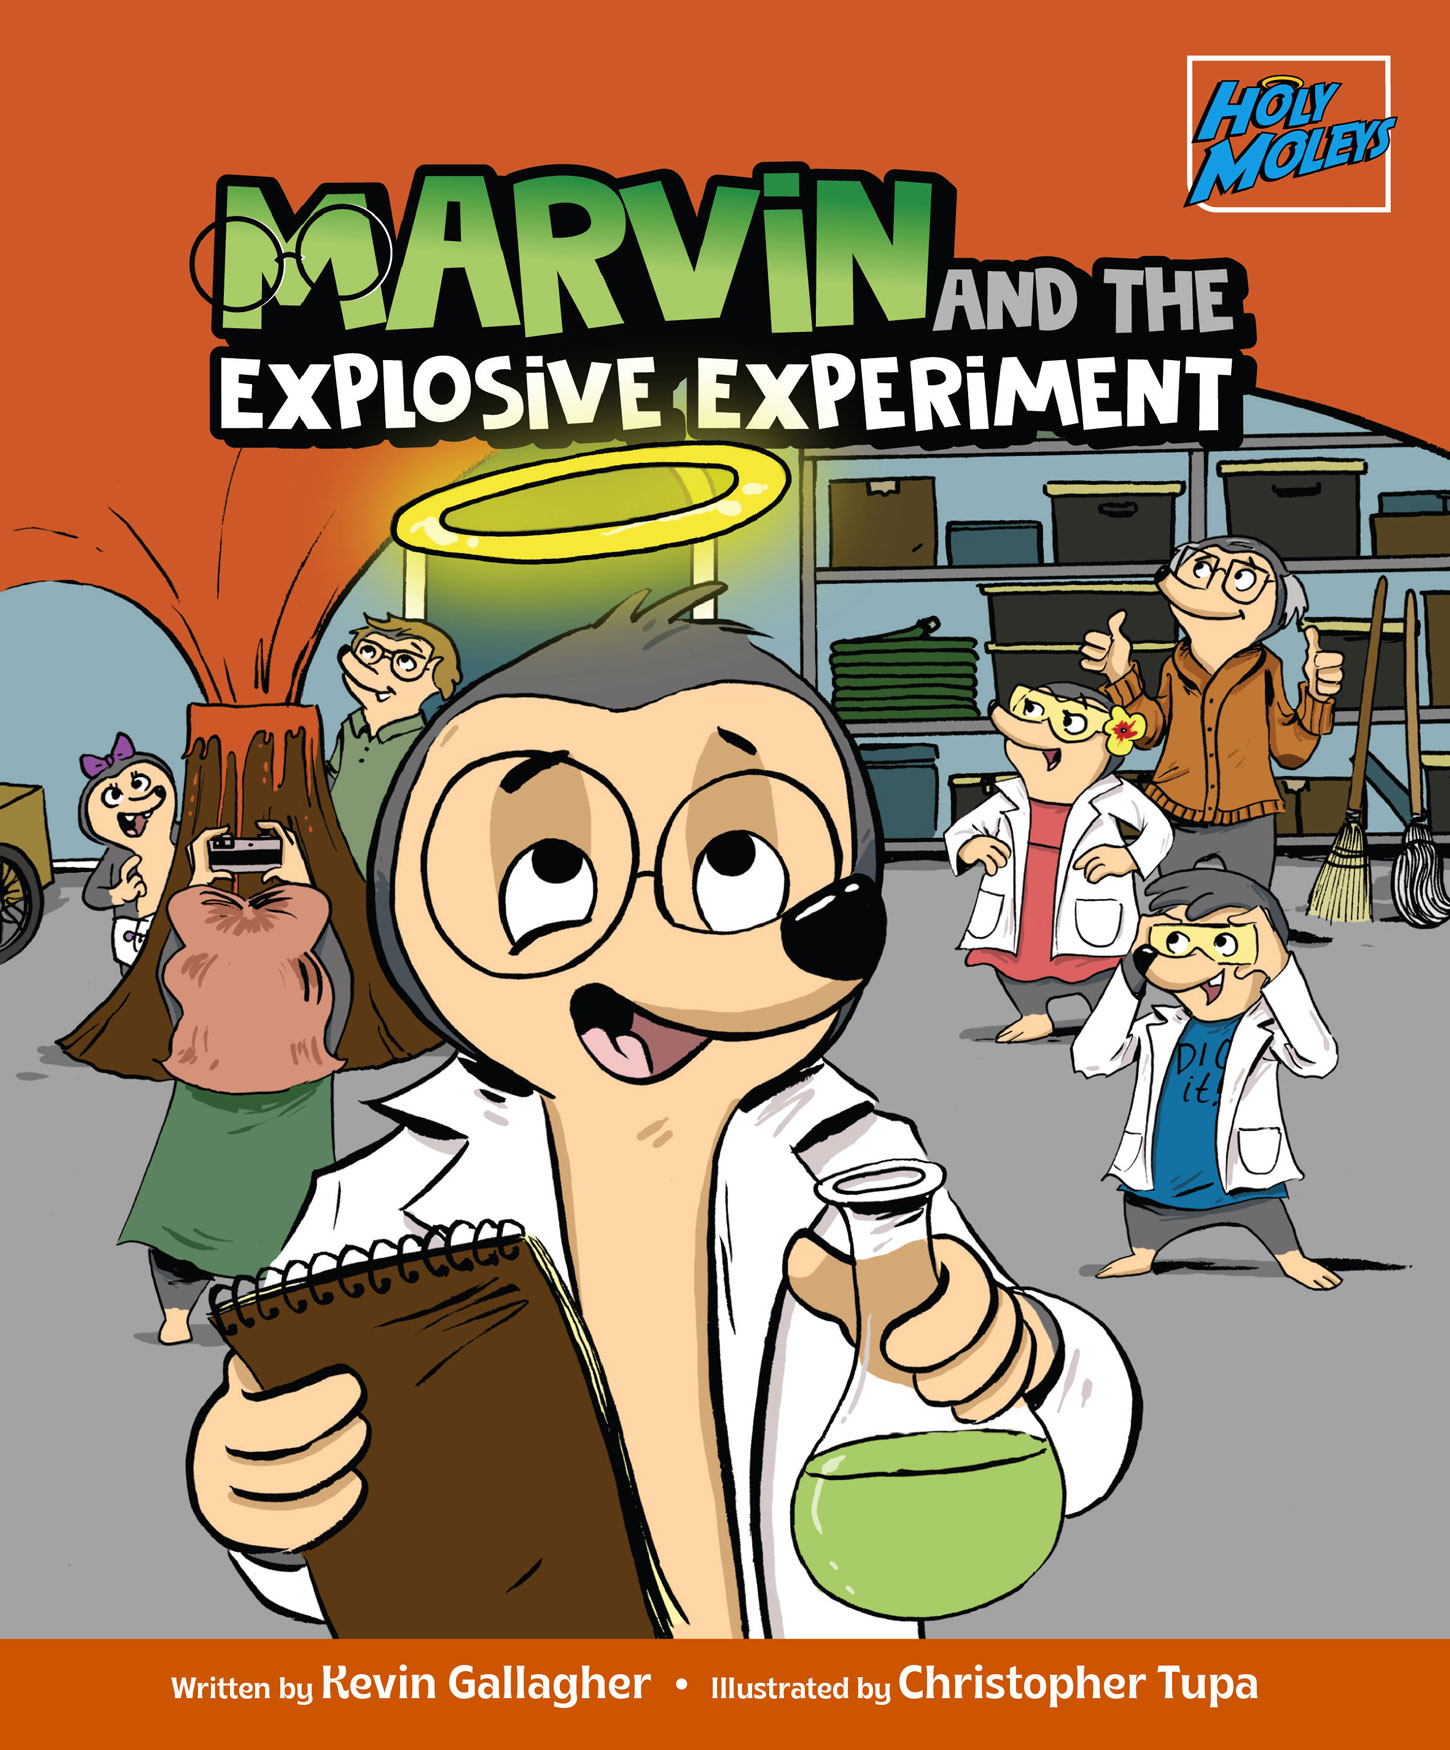 Marvin and the Explosive Experiment / Holy Moleys Series / Kevin Gallagher